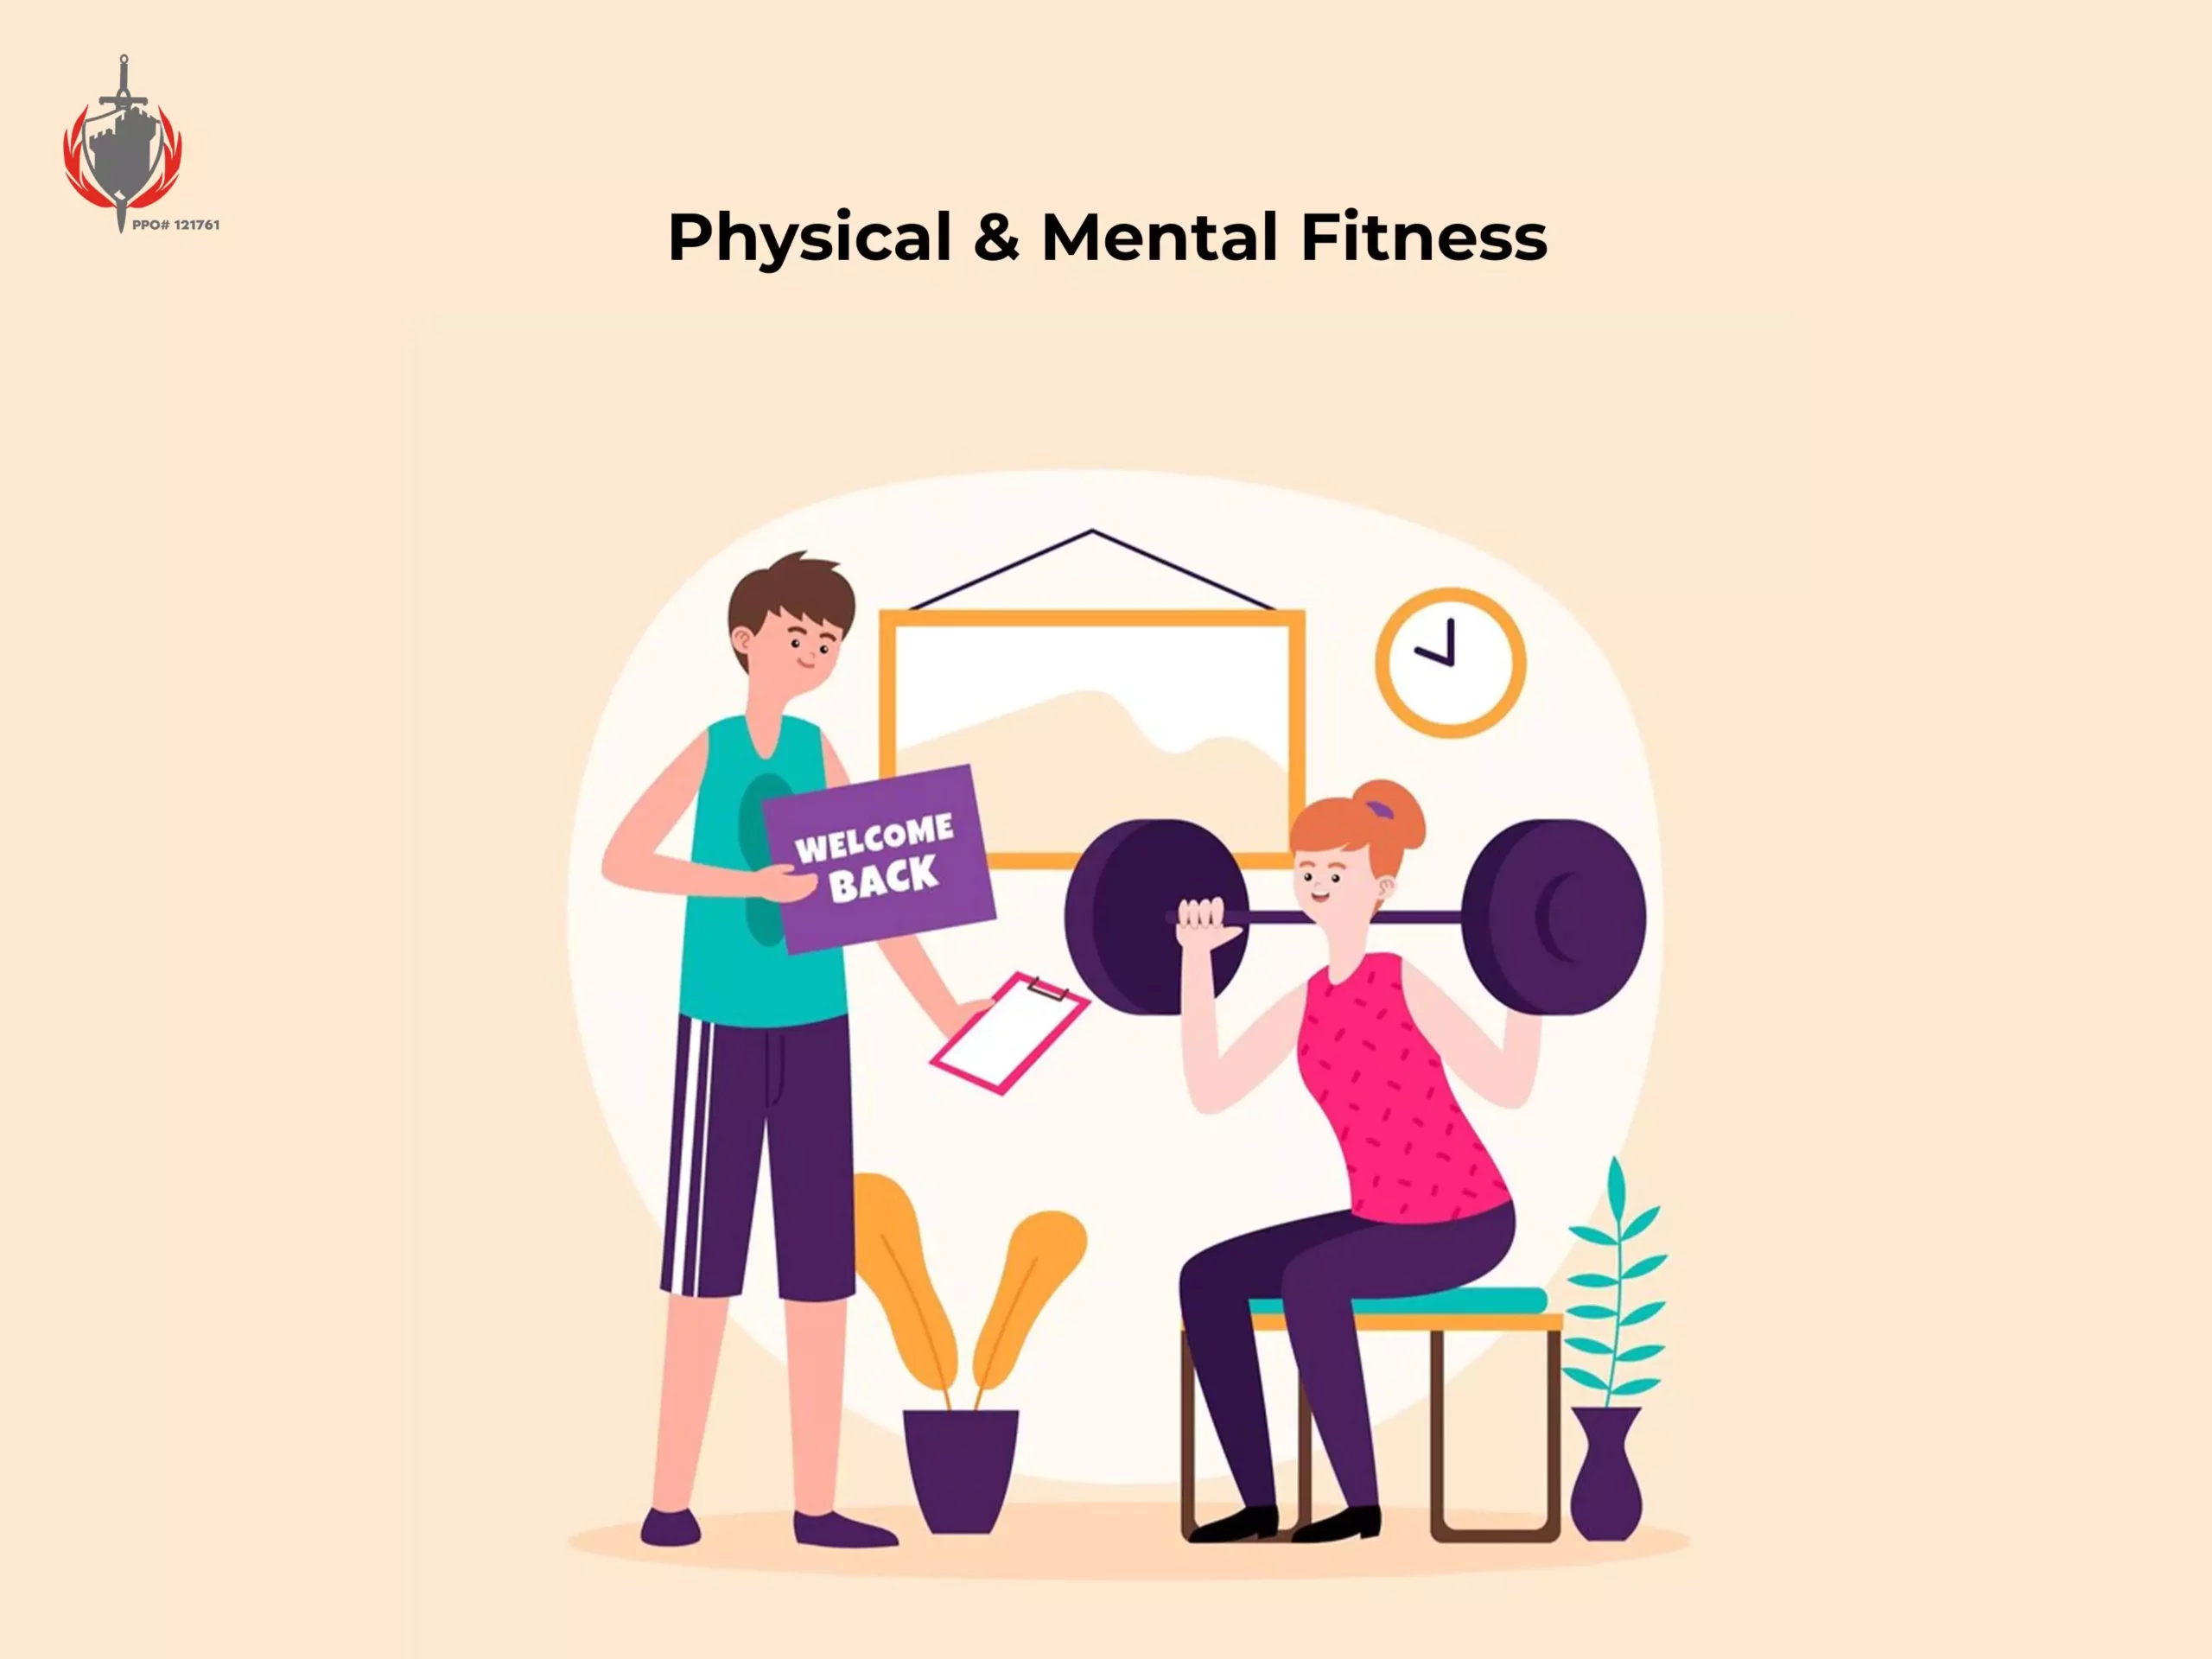 Physical & Mental Fitness